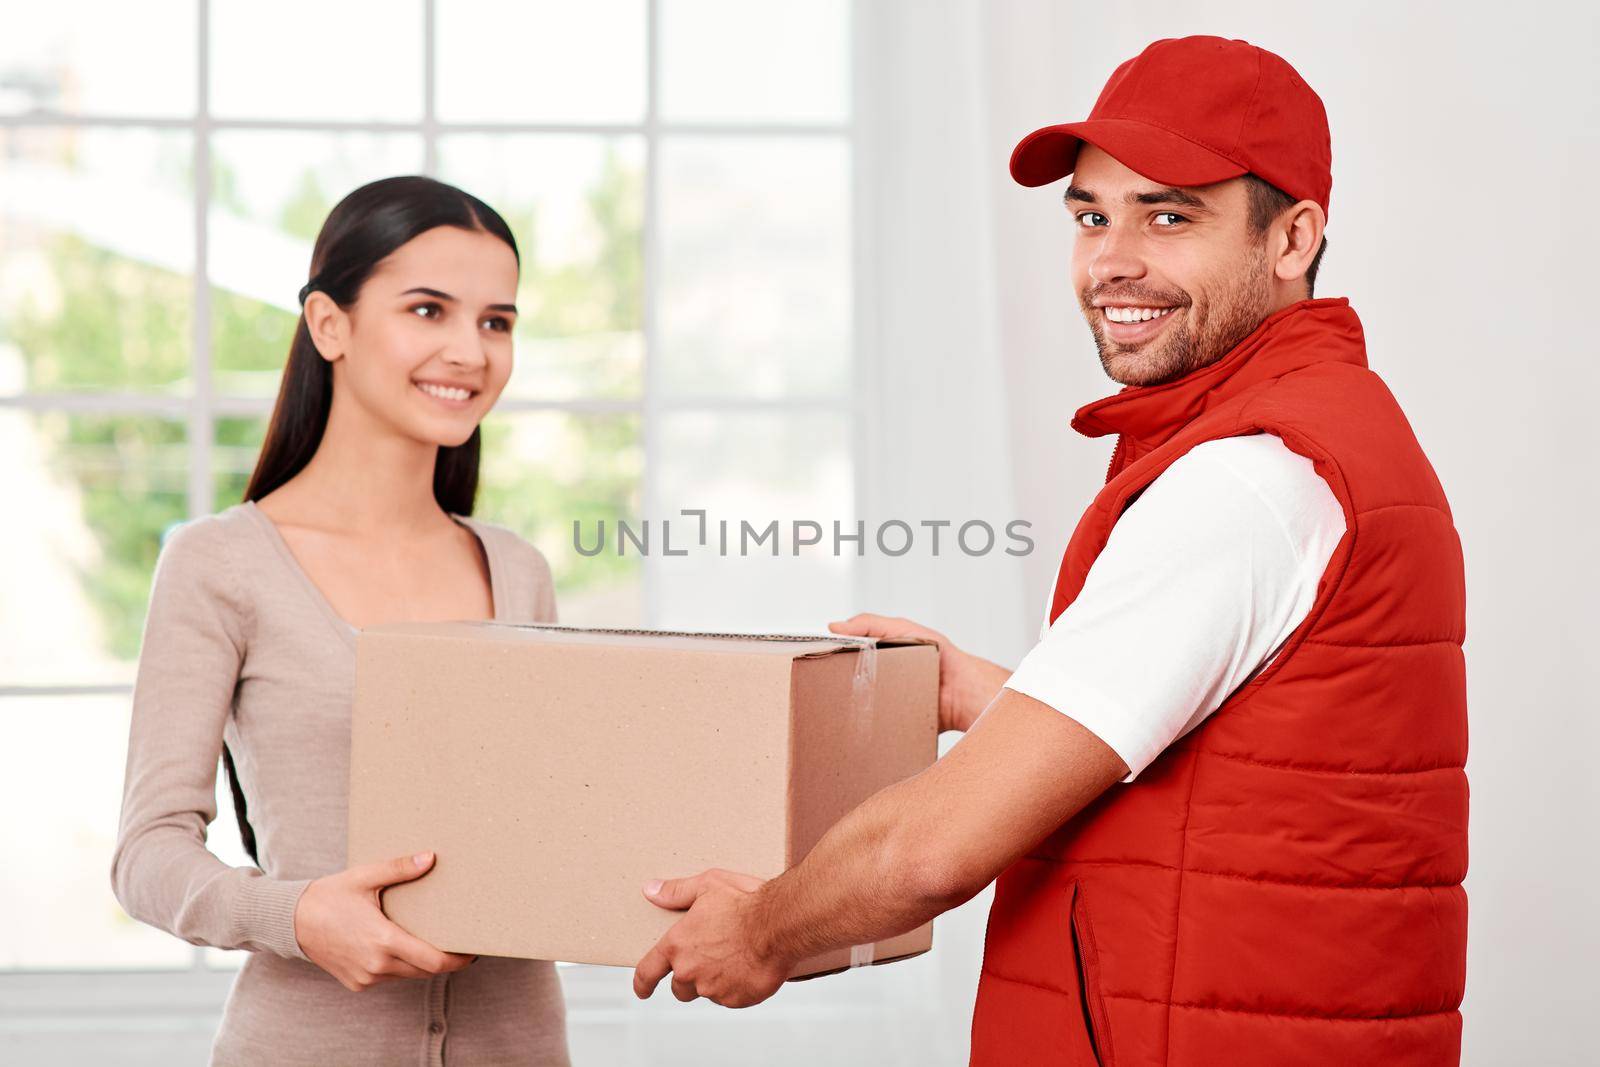 Cheerful postman wearing red postal uniform is delivering parcel to a satisfied client. He is looking at the camera, while she is looking at him. They both hold carton box and smiling. Friendly worker, high quality delivery service. Indoors. Bright interior.